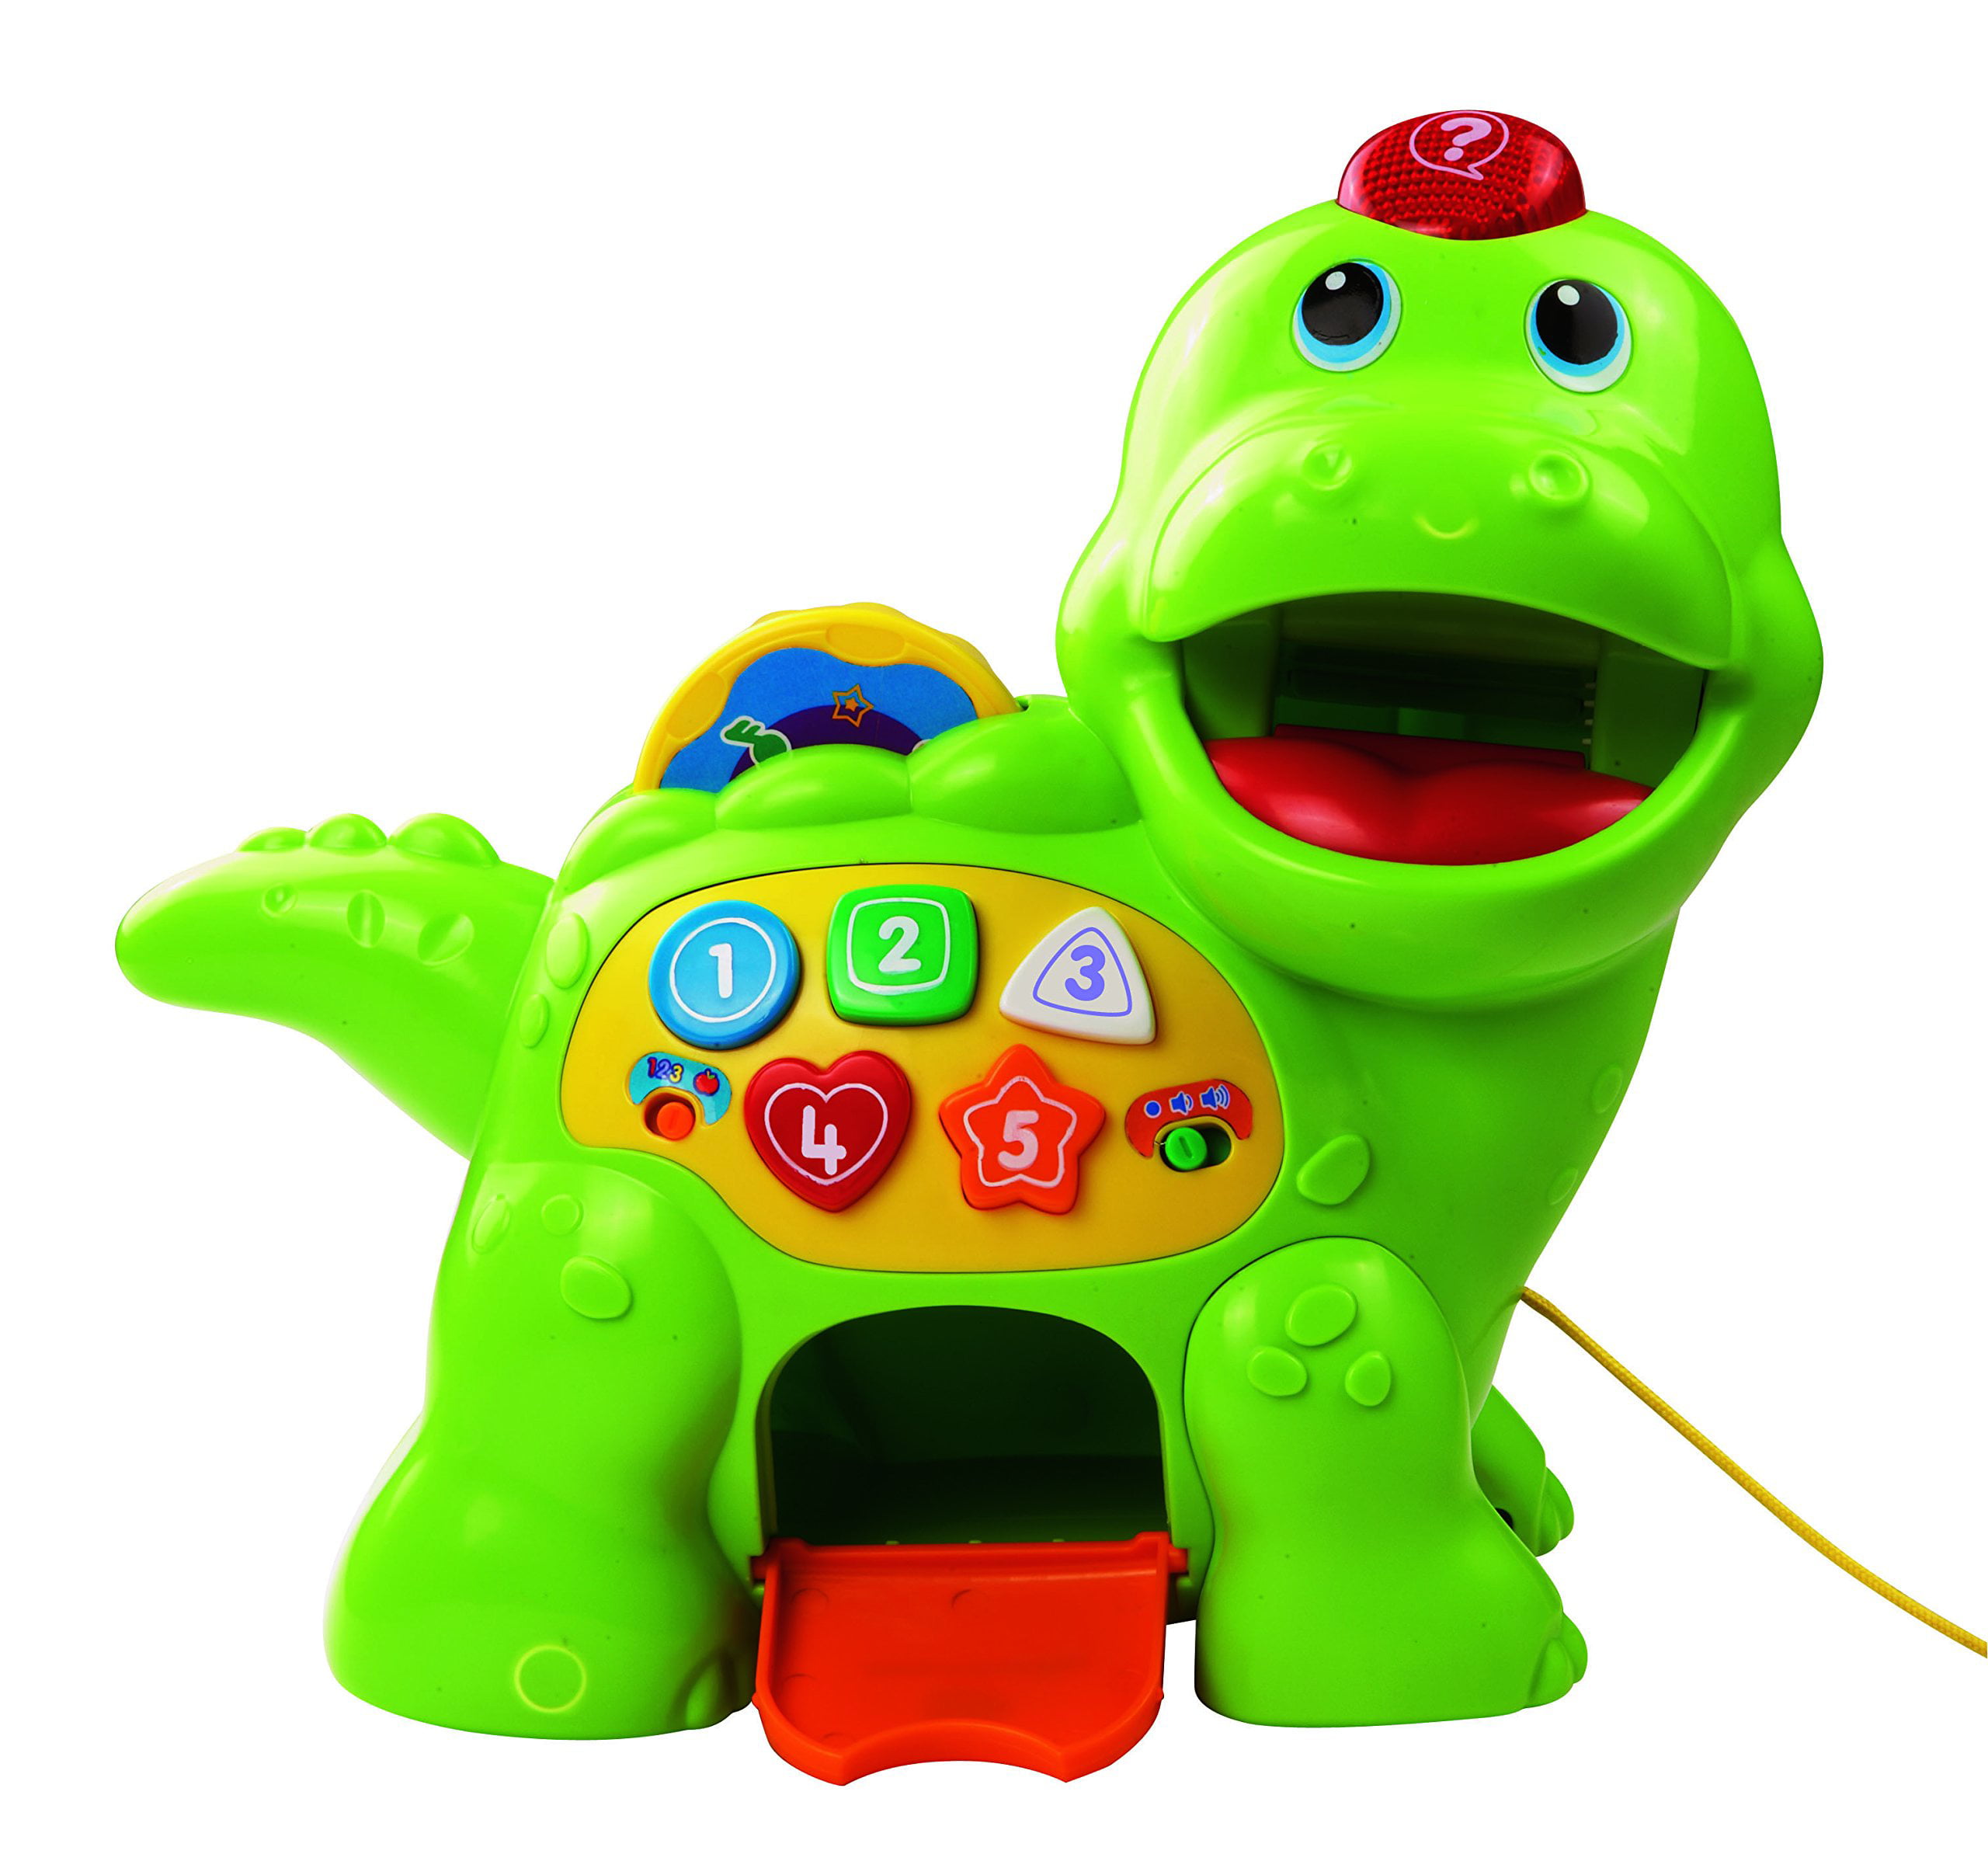 Vtech Baby Feed Me Dino Toy Play Set Pre School Educational Fun Learning Songs 